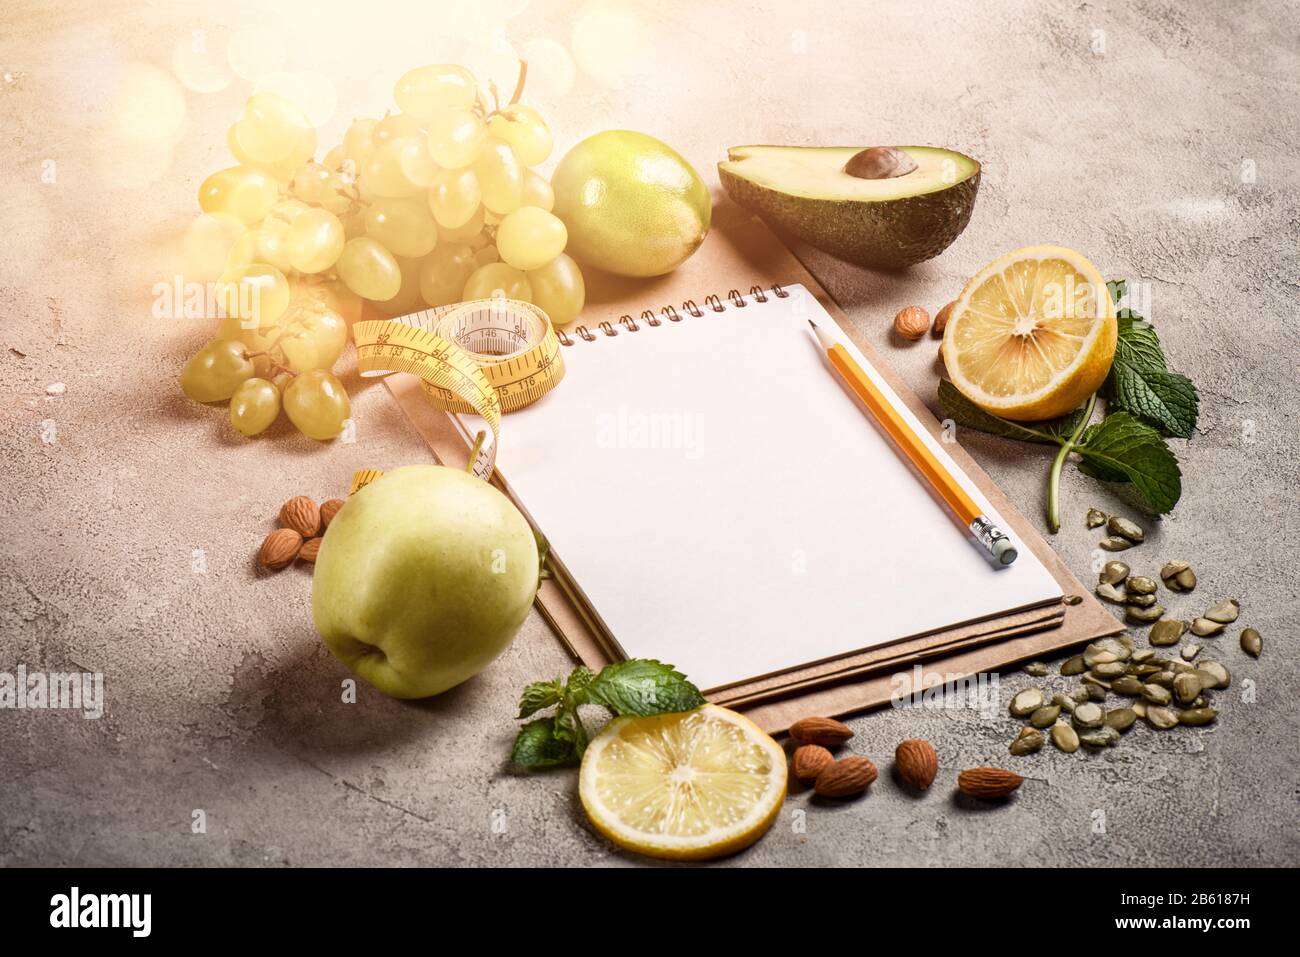 Healthy background of vegetable. Concept of genuine food Stock Photo